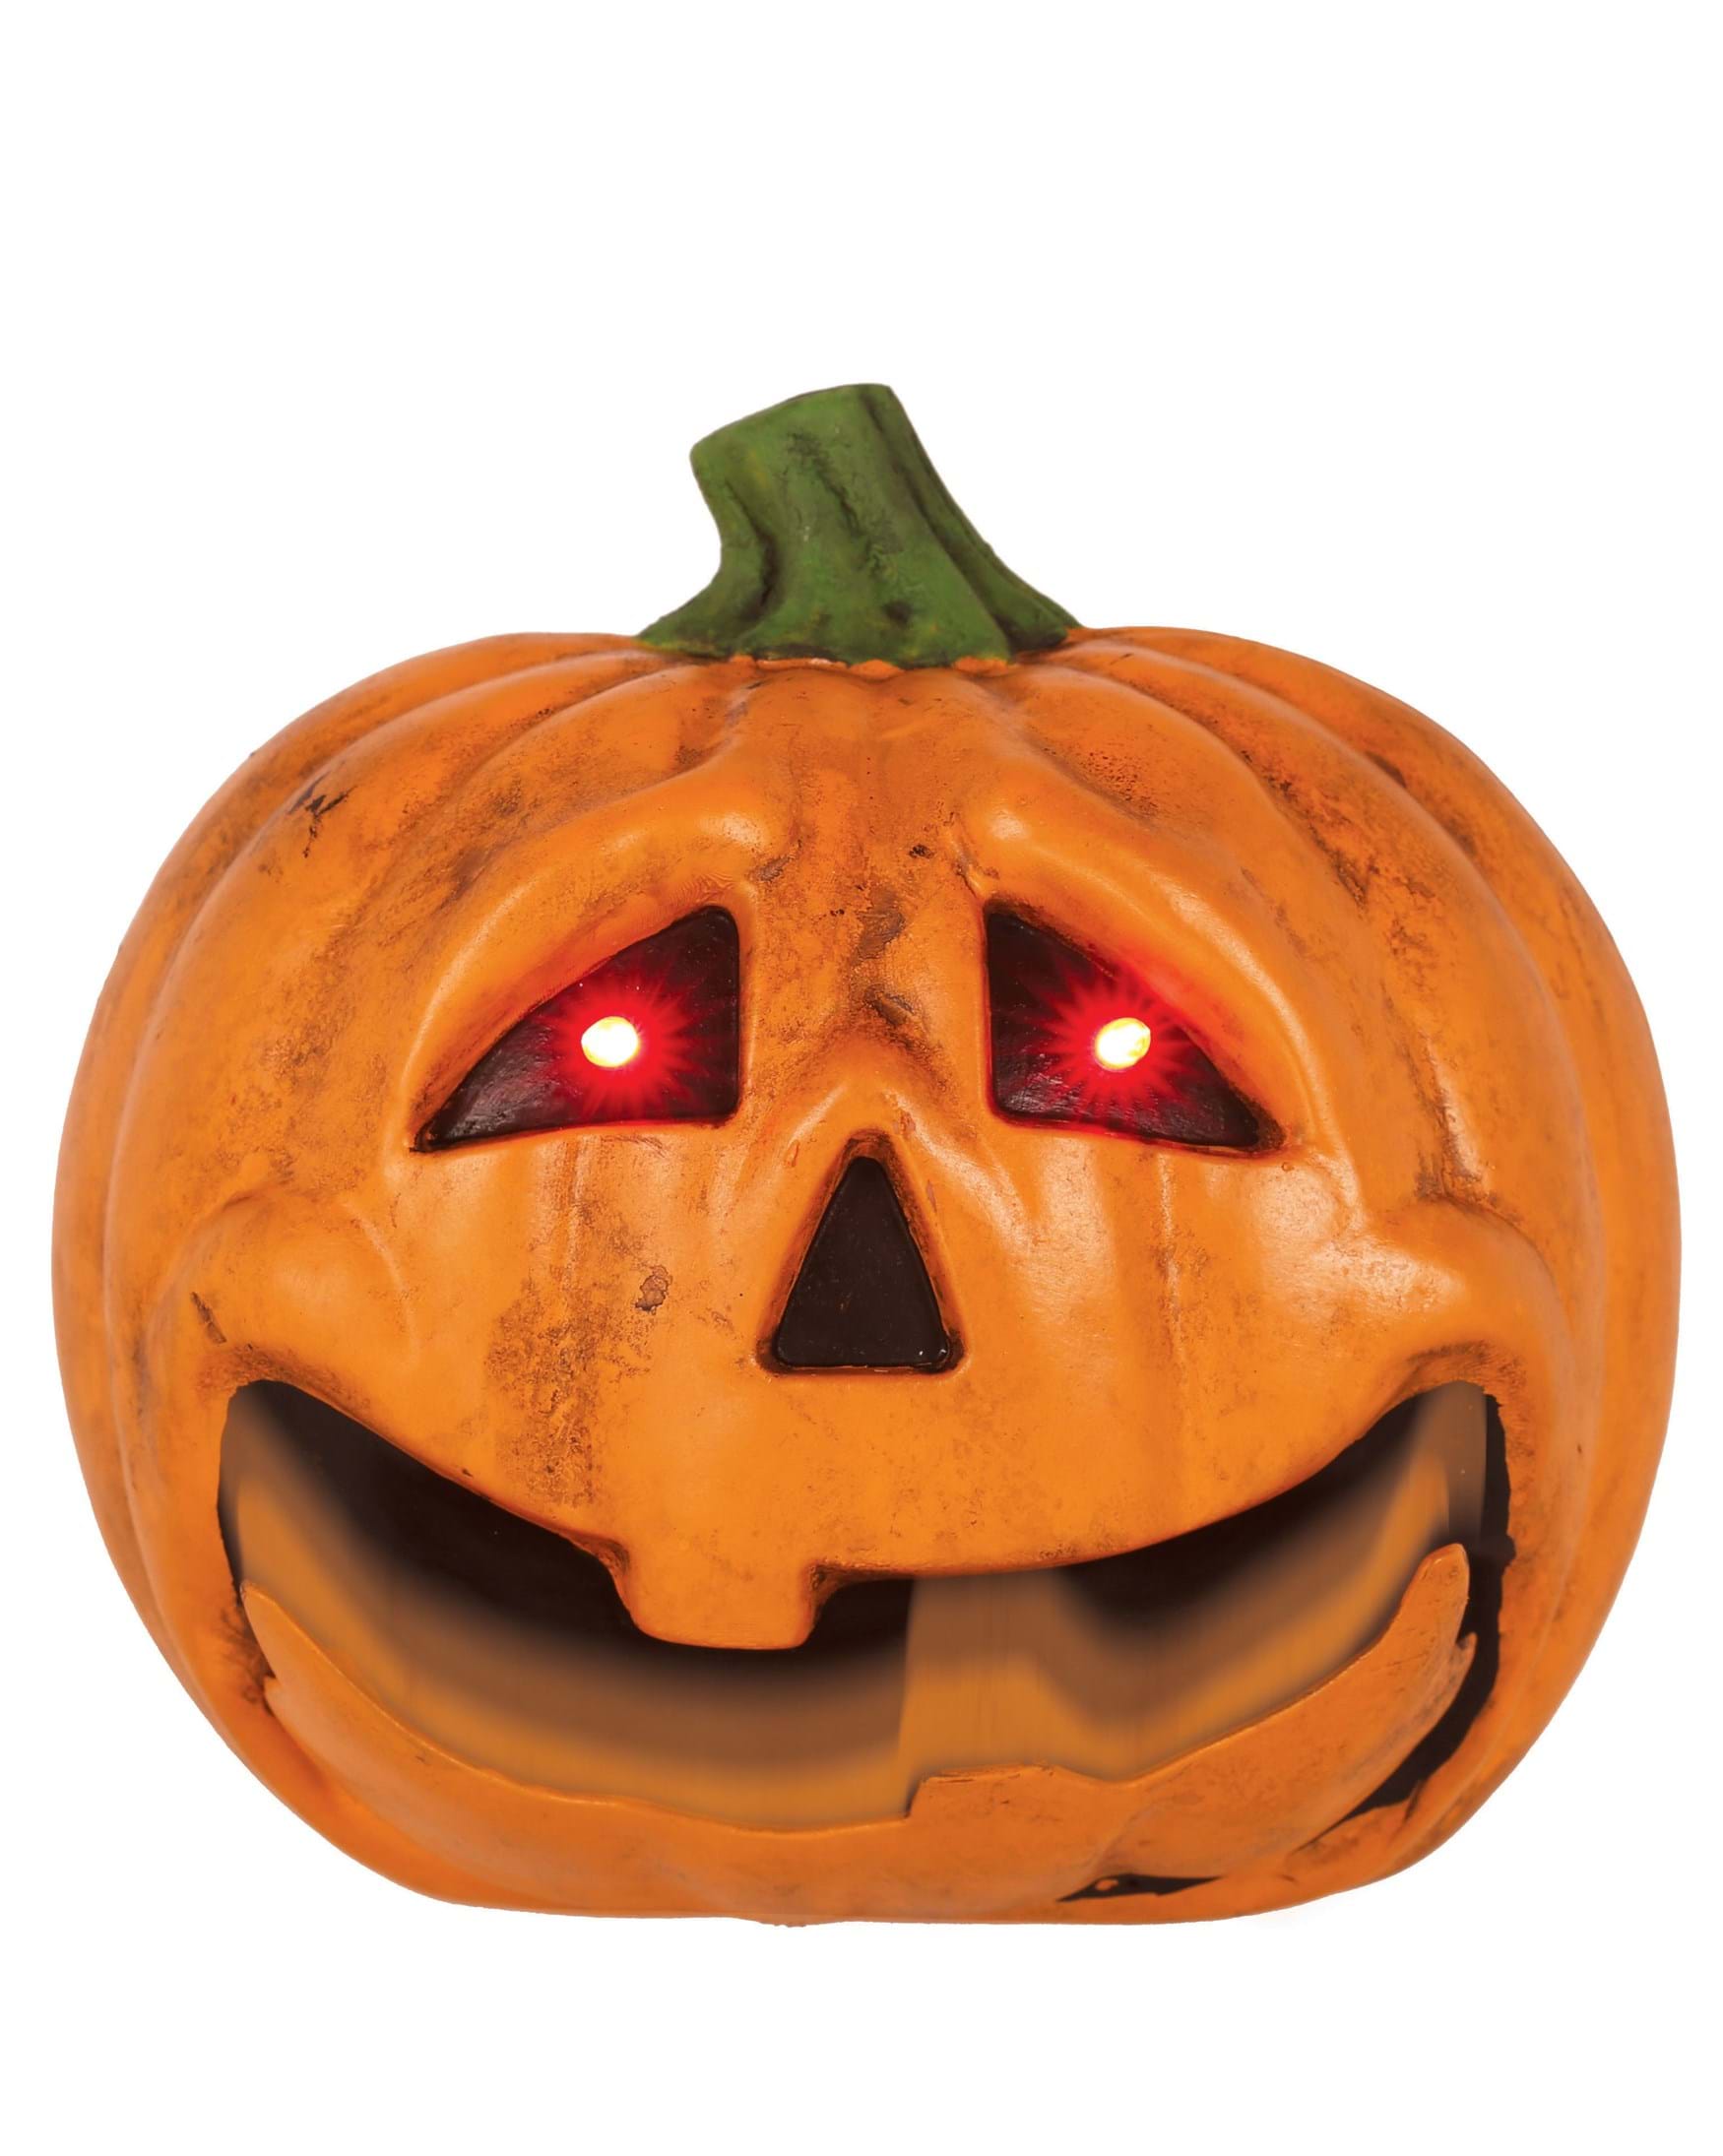 7 Light Up With Moving Jaw And Talking Jack O' Lantern Decoration